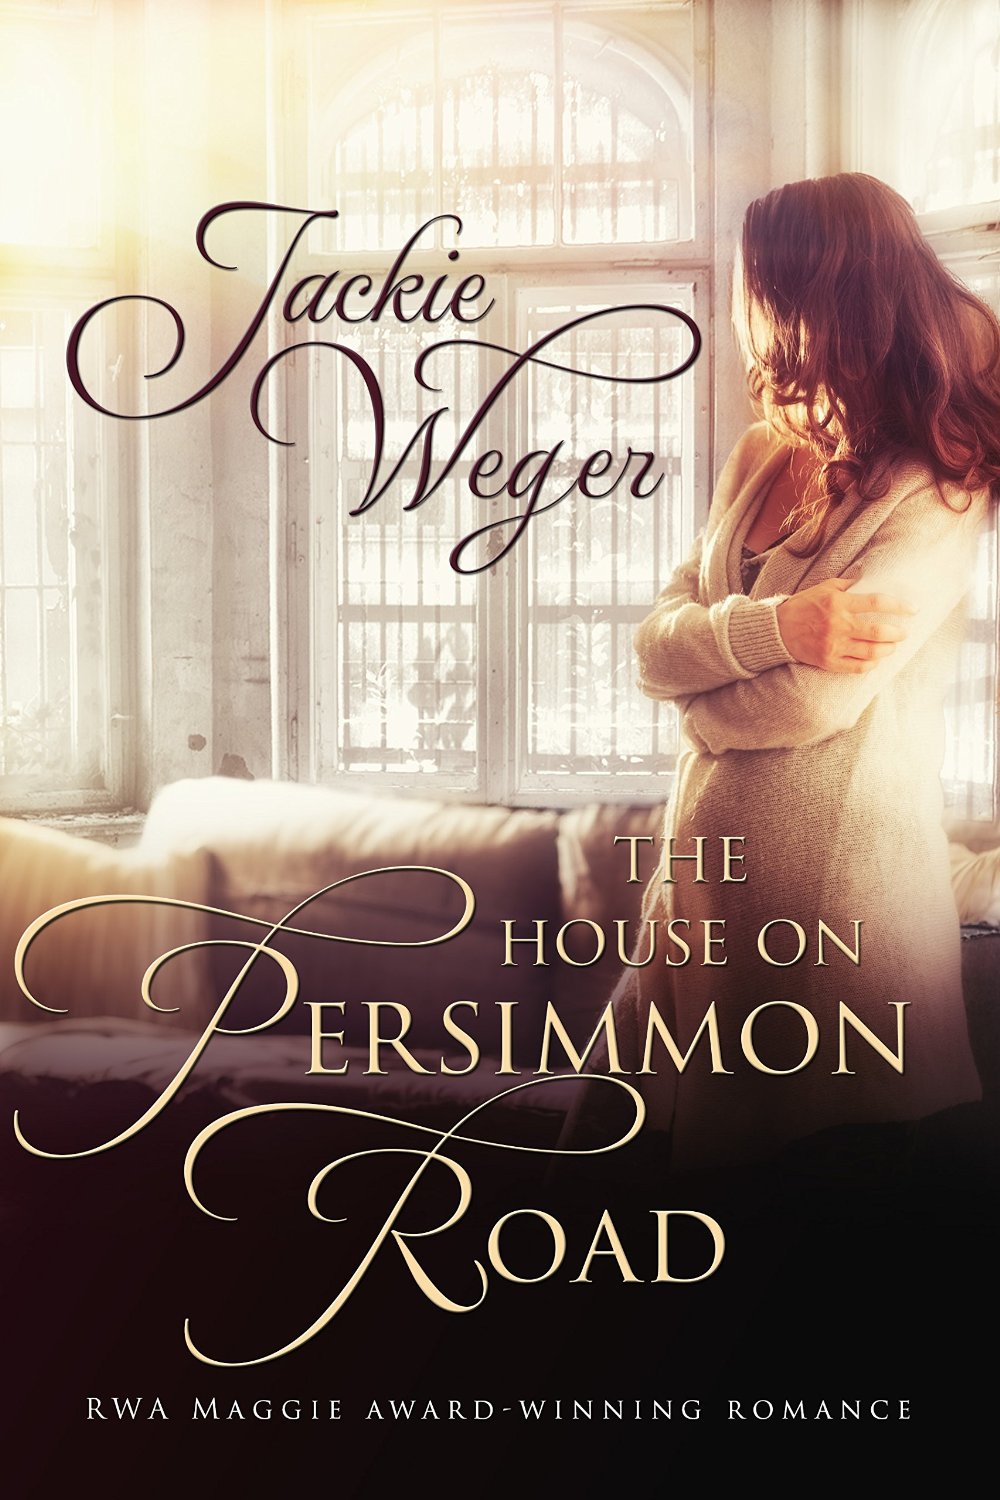 The House on Persimmon Road by Jackie Weger